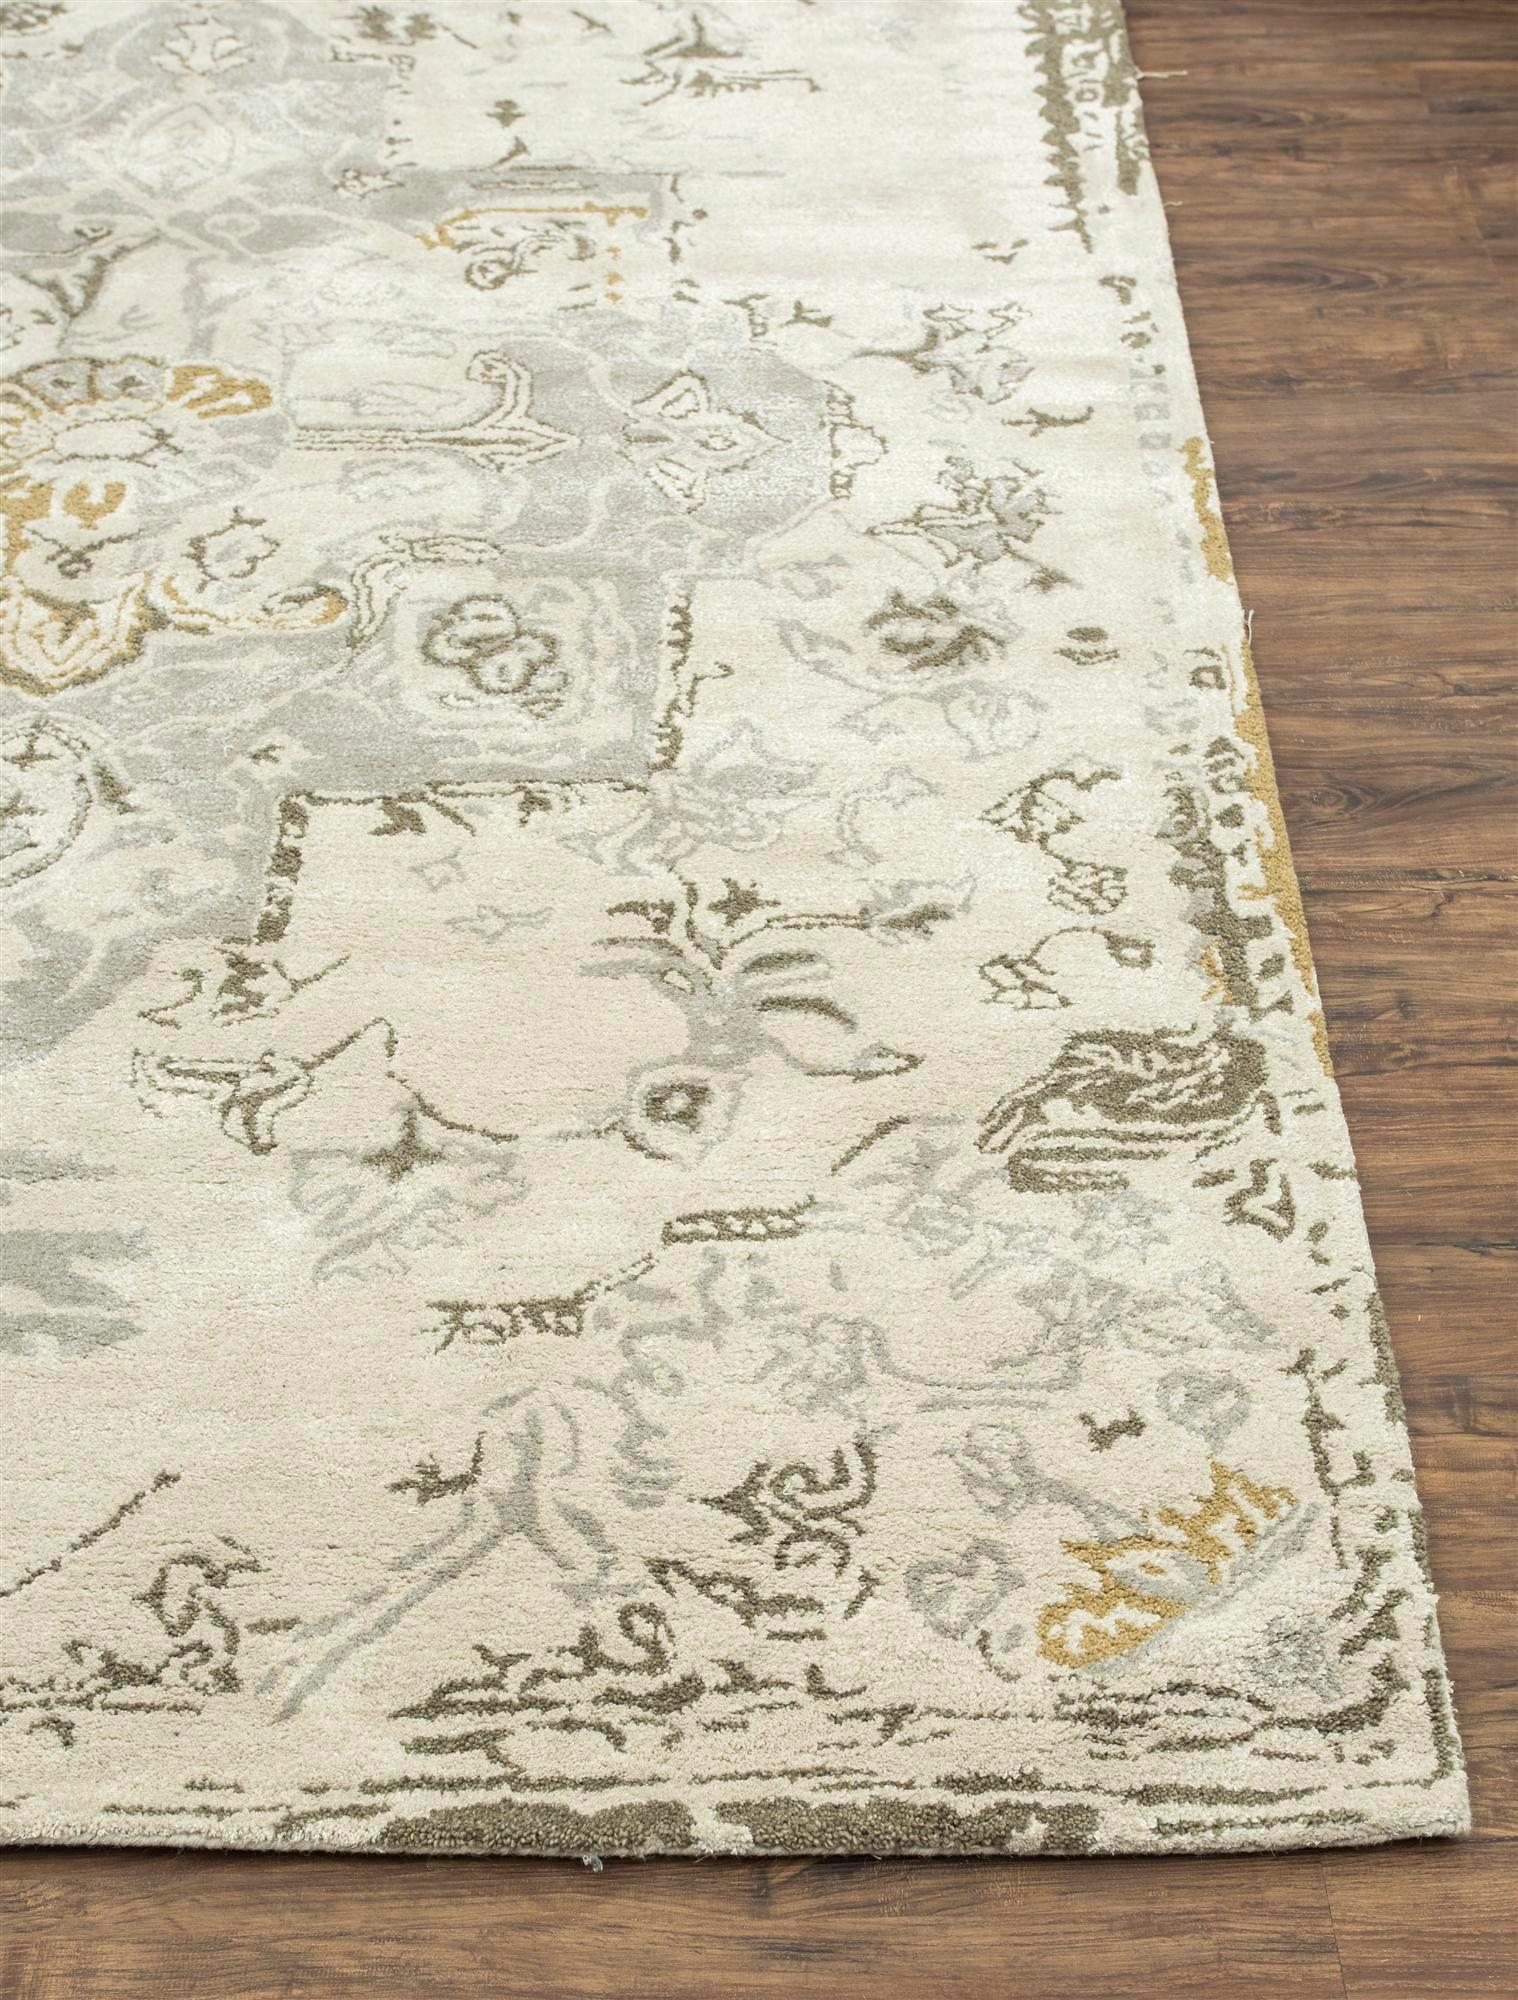 Say goodbye to ordinary and hello to extraordinary with this beautiful rug from our exclusive Mythos collection. The color palette of antique white and ashwood isn't just a combination, it's the perfect blend of sophistication. One can find this